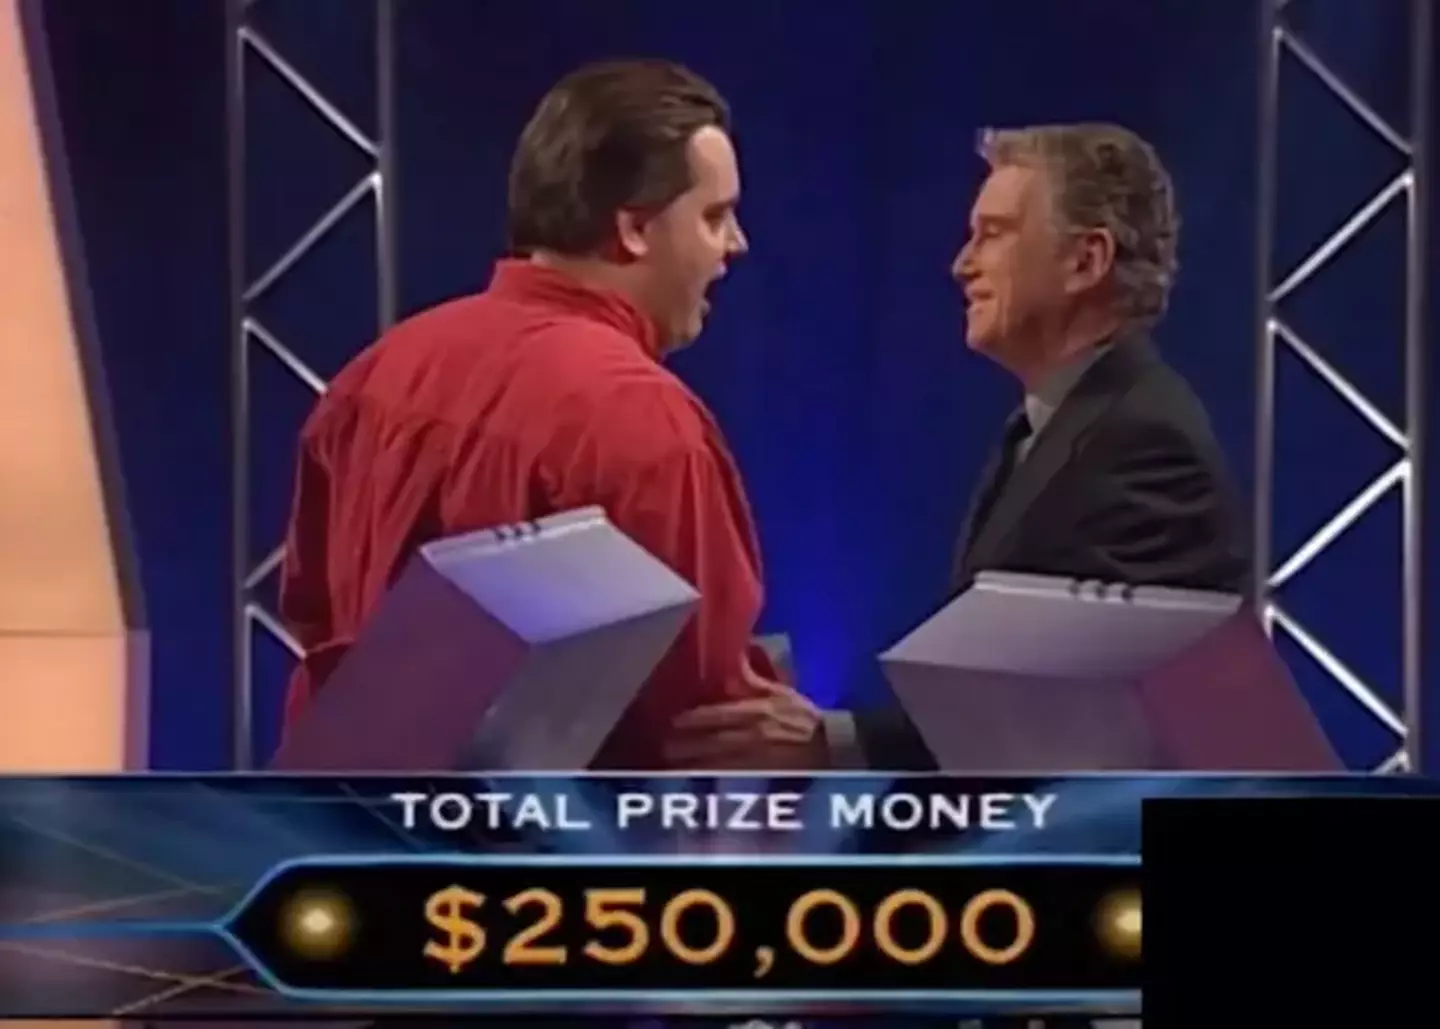 Who Wants To Be A Millionaire? viewers were screaming at the television.